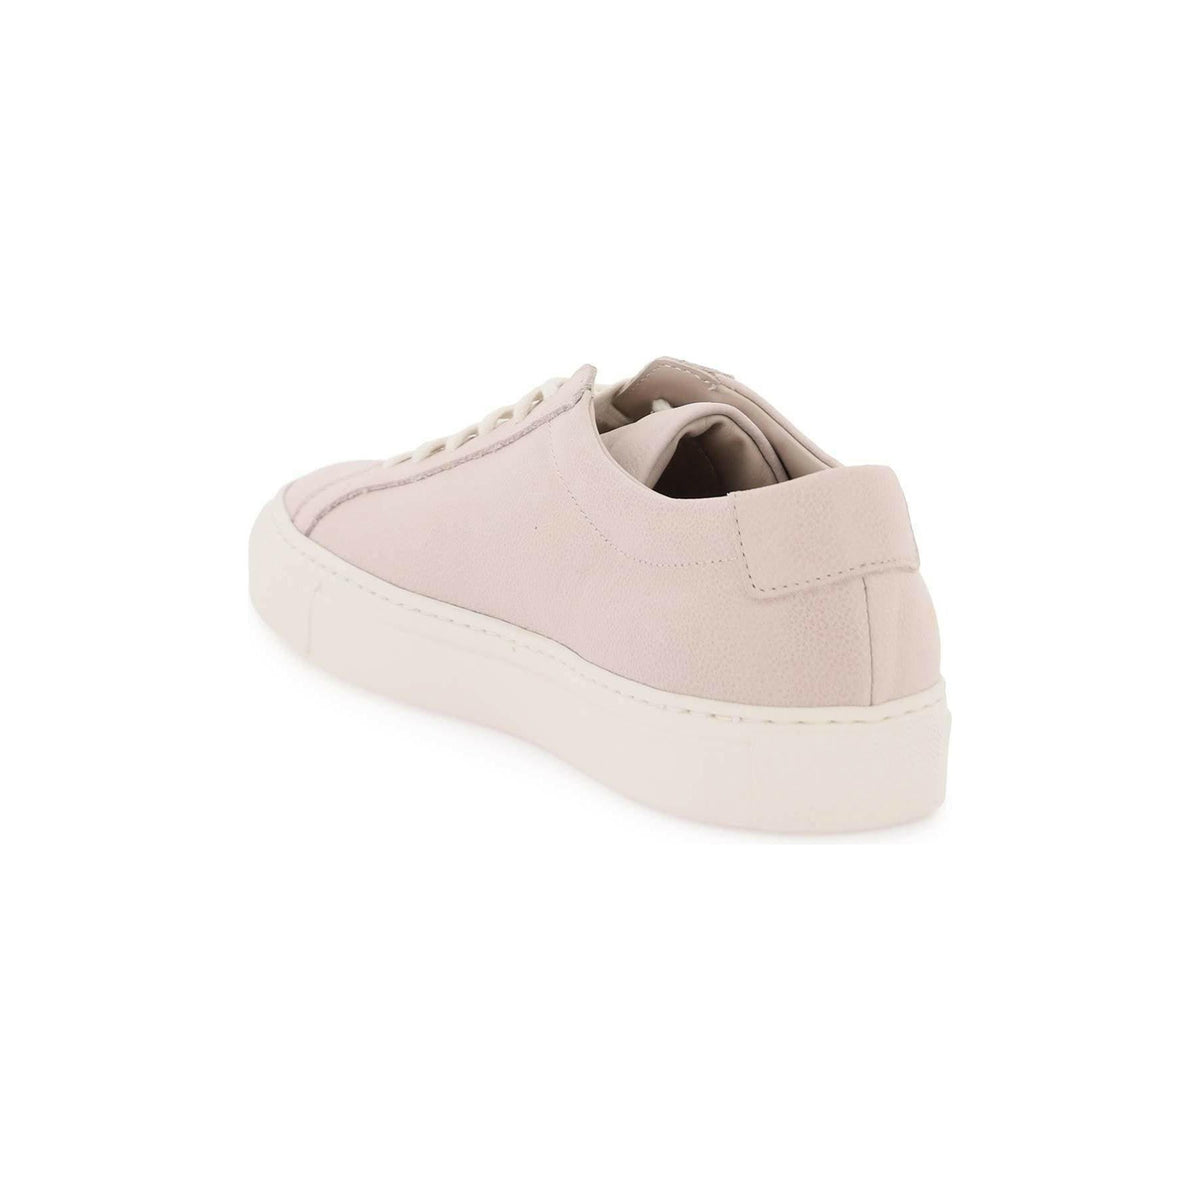 COMMON PROJECTS - Nude Original Achilles Low-Top Leather Sneakers - JOHN JULIA